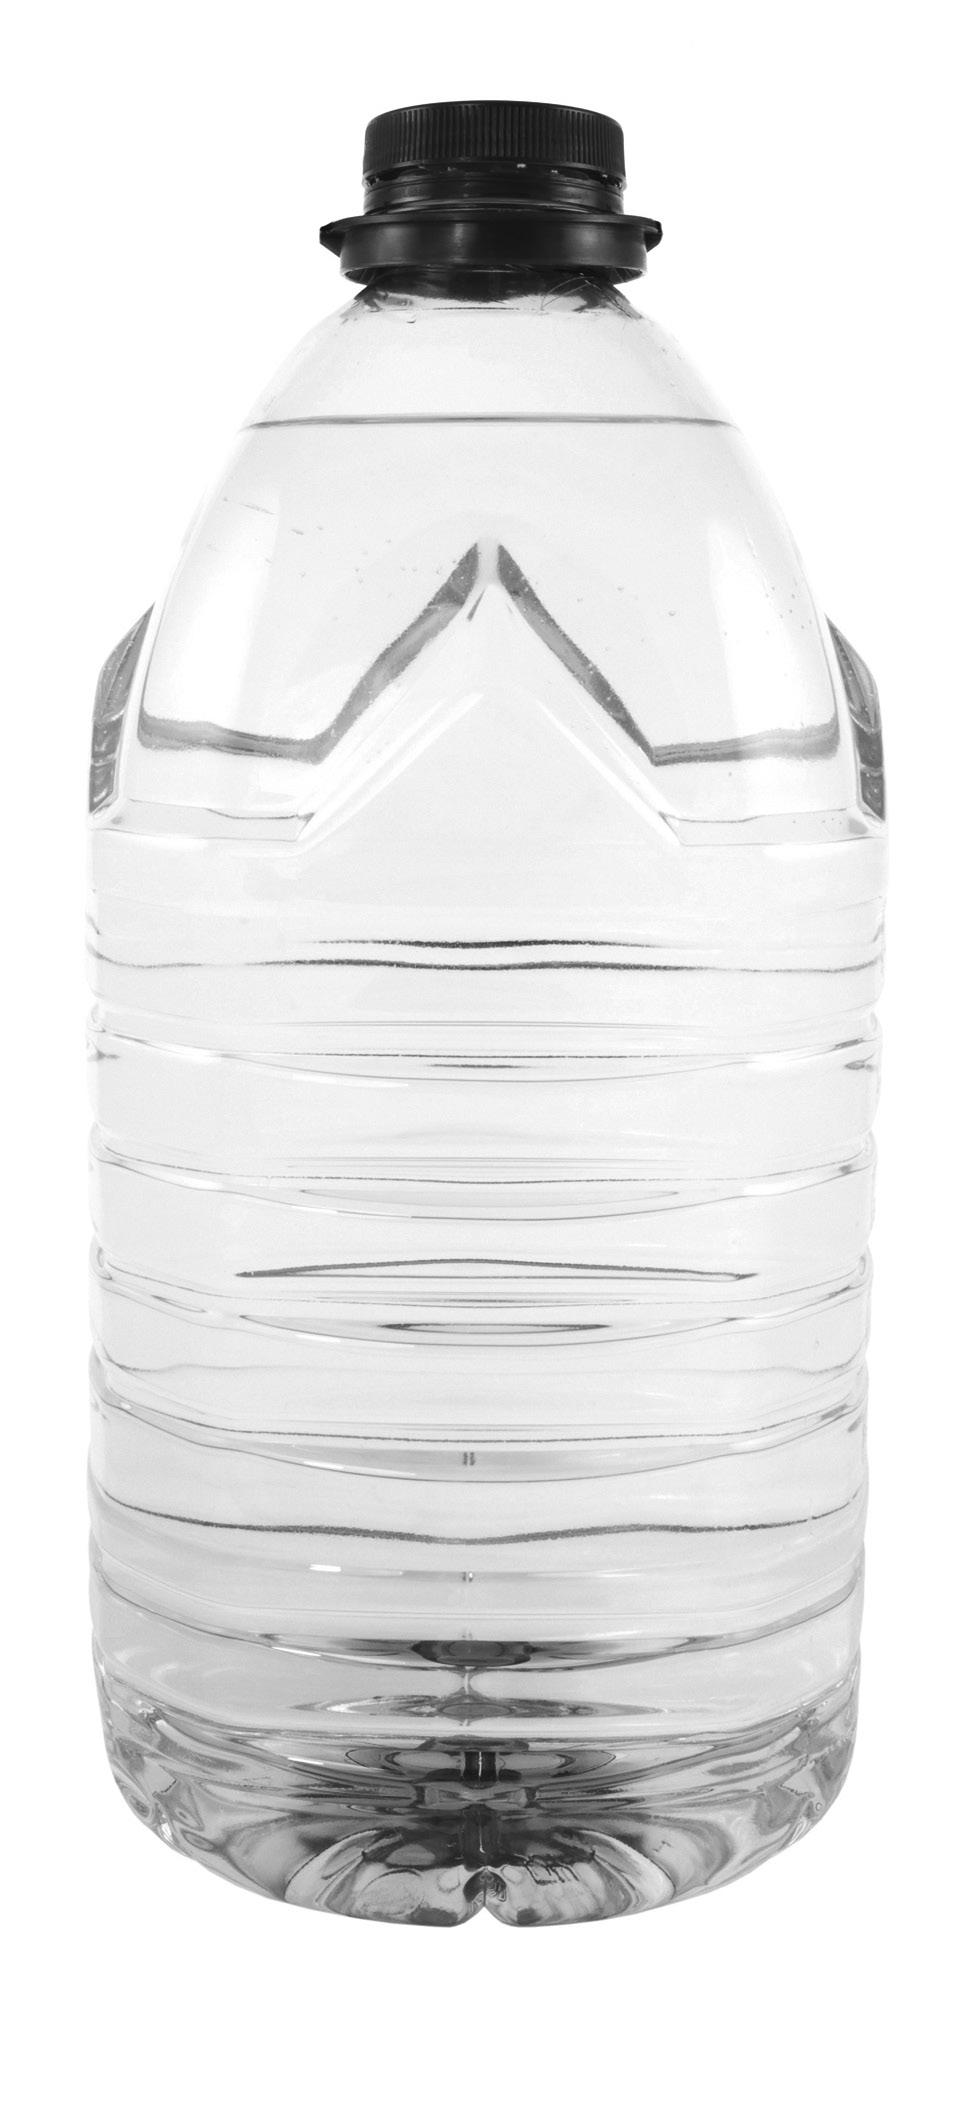 6 Kirsty is going to order drinking water for the new office. She orders this bottle. 15 litres The glasses in the office each hold 250 ml.